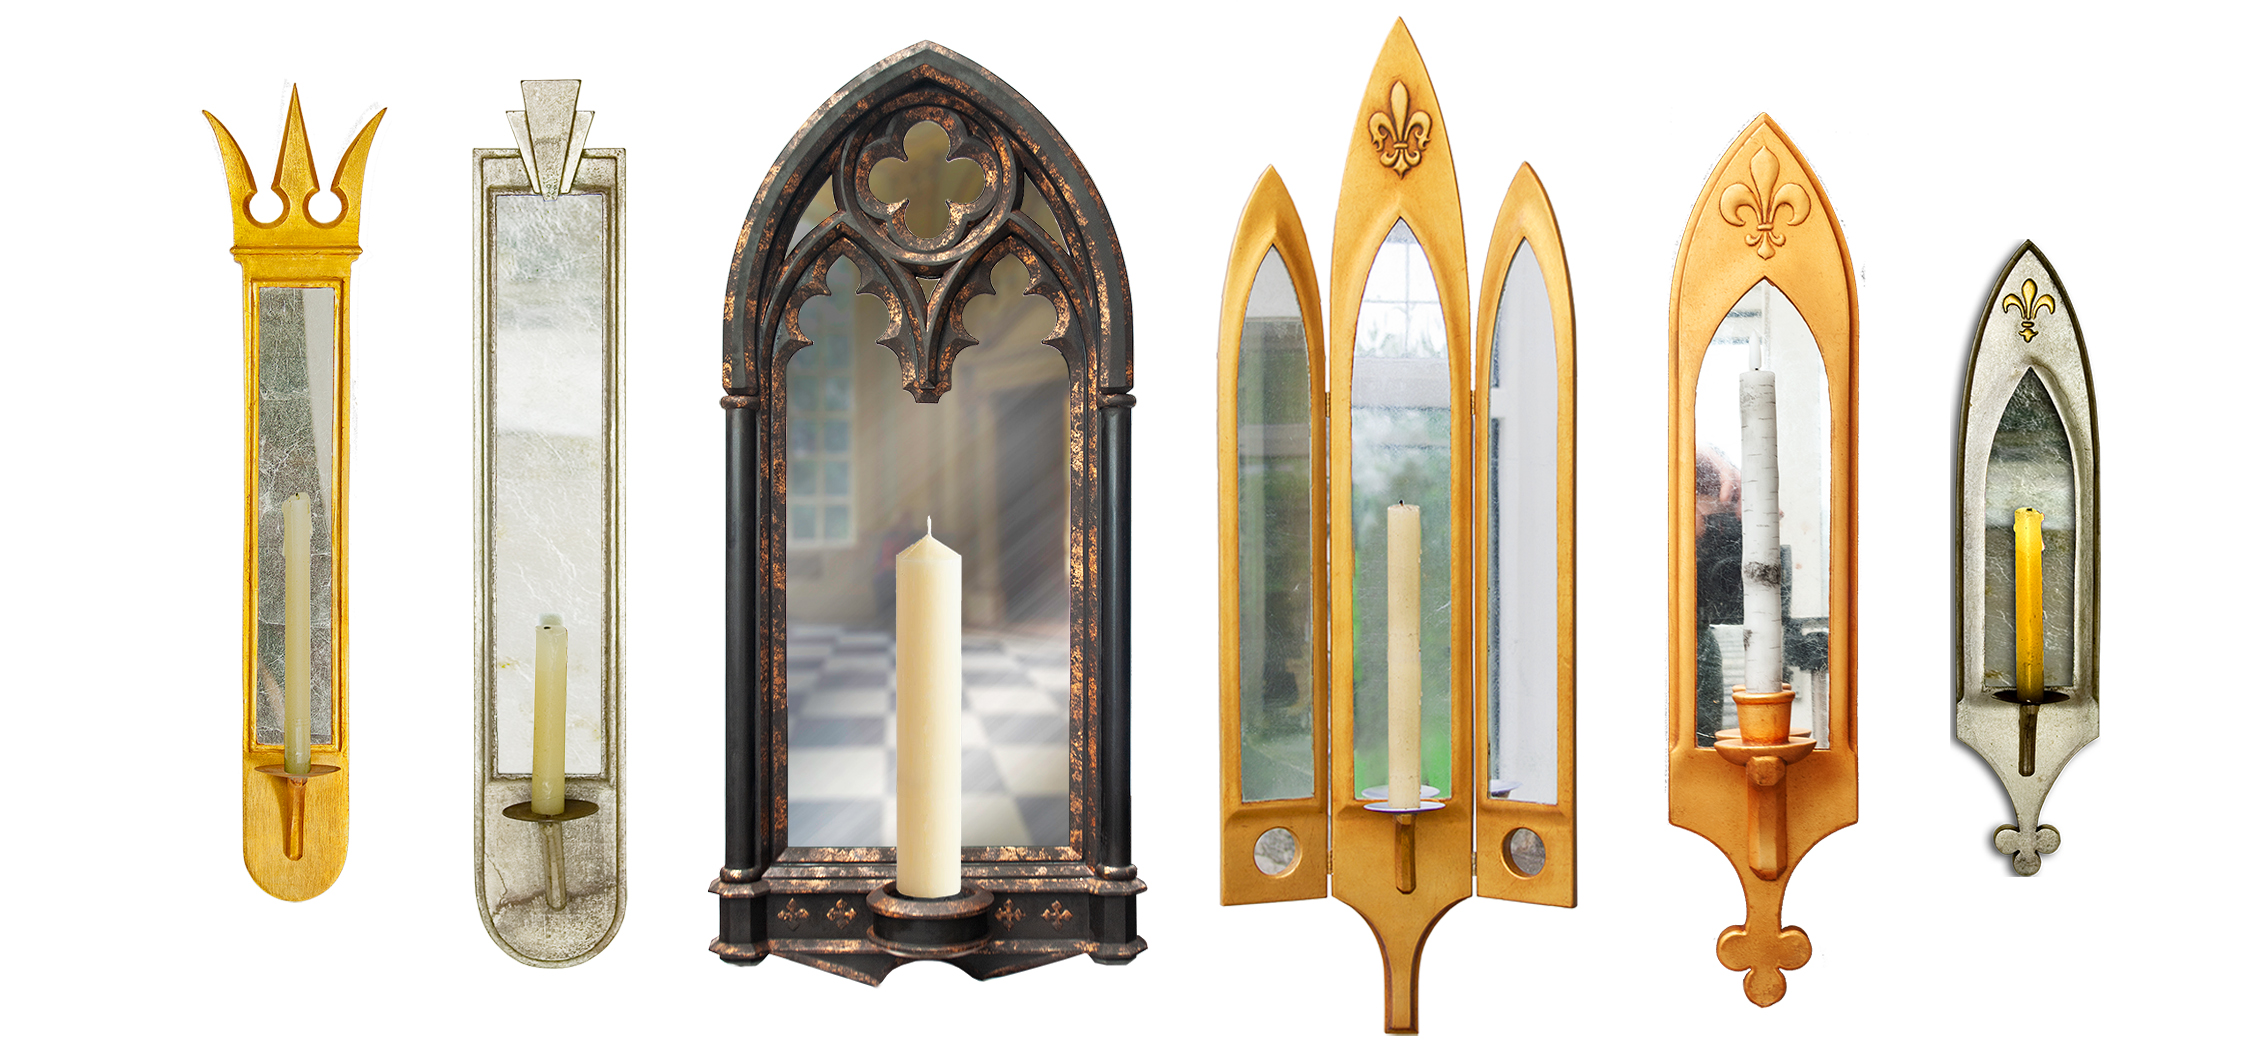 A stunning selection of my handmade Candle Sconces